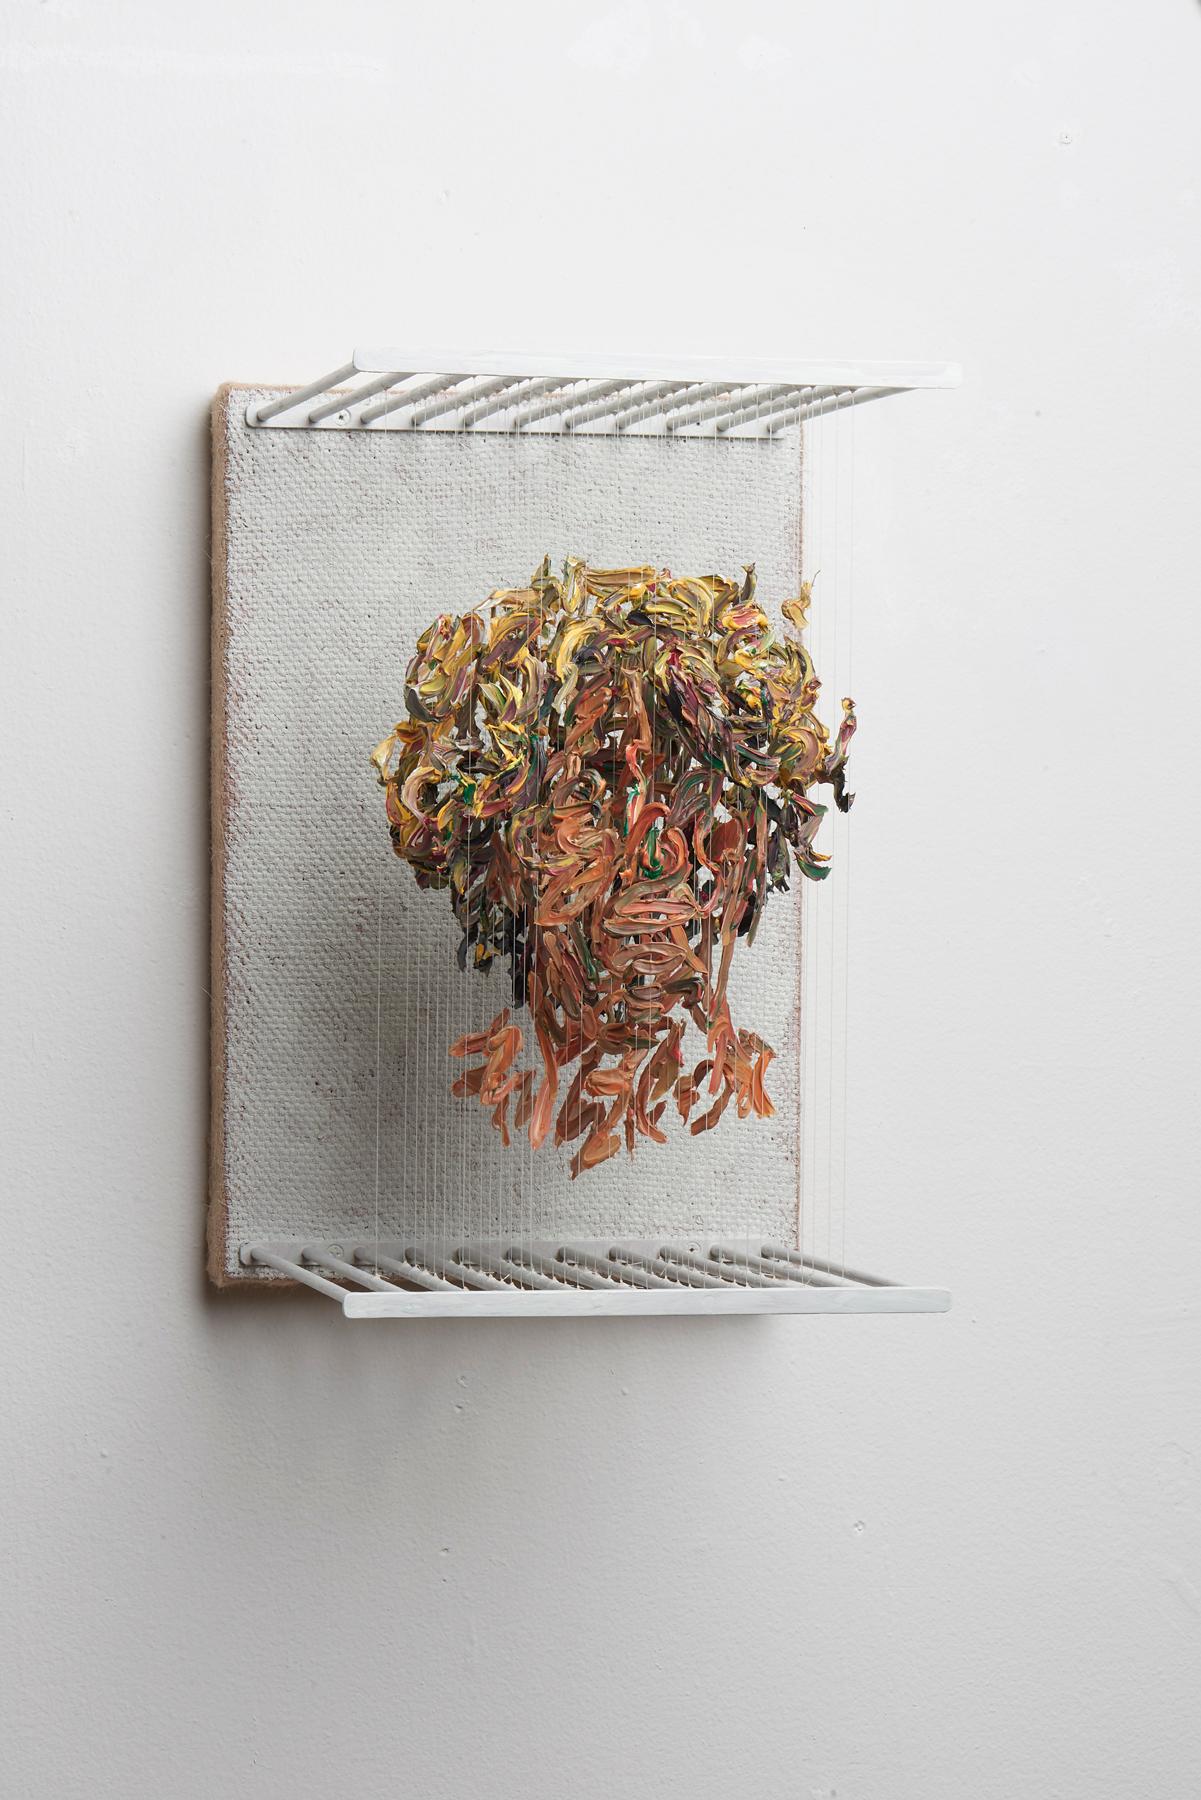 SOH - figurative portrait sculpture in 3D with suspended dried paint strokes - Painting by Chris Dorosz